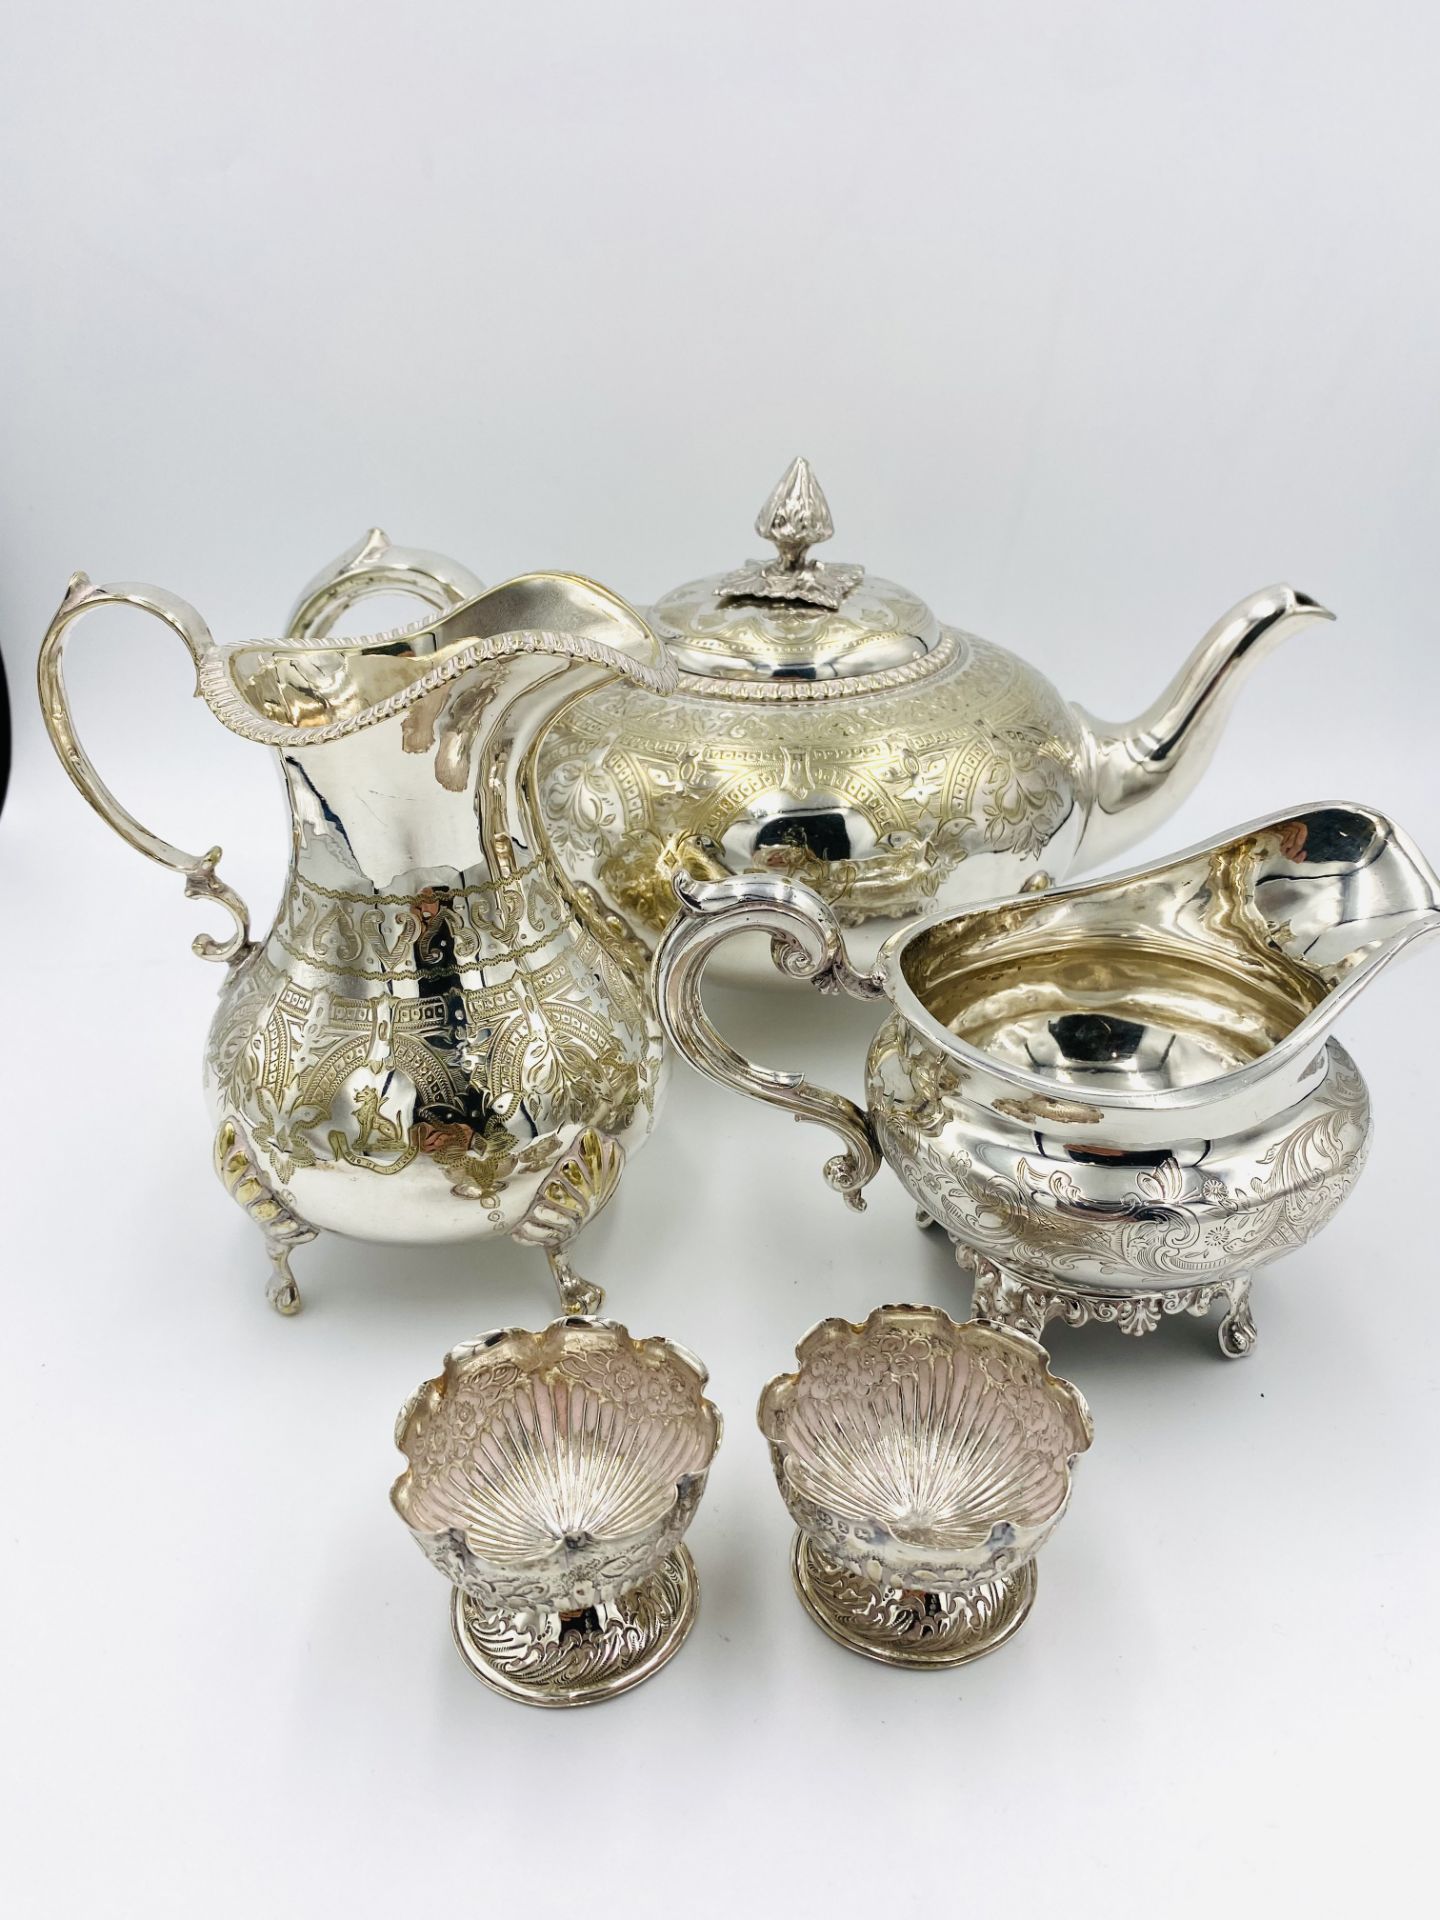 Victorian silver milk jug, pair of silver egg cups and a silver plate teapot